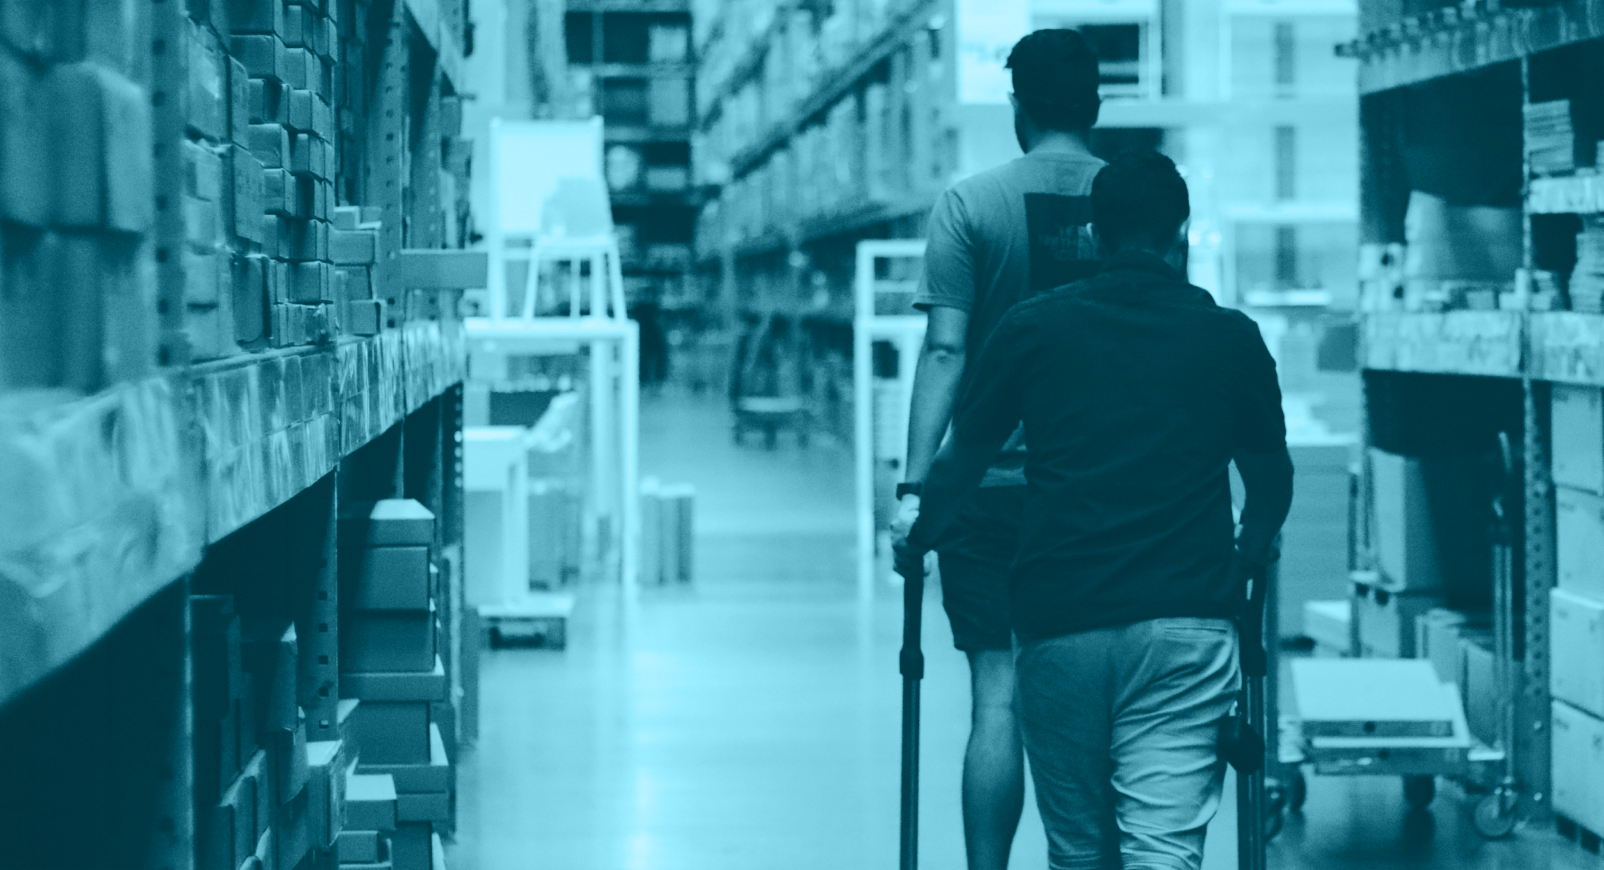 Two people walking between stacked shelves in a warehouse